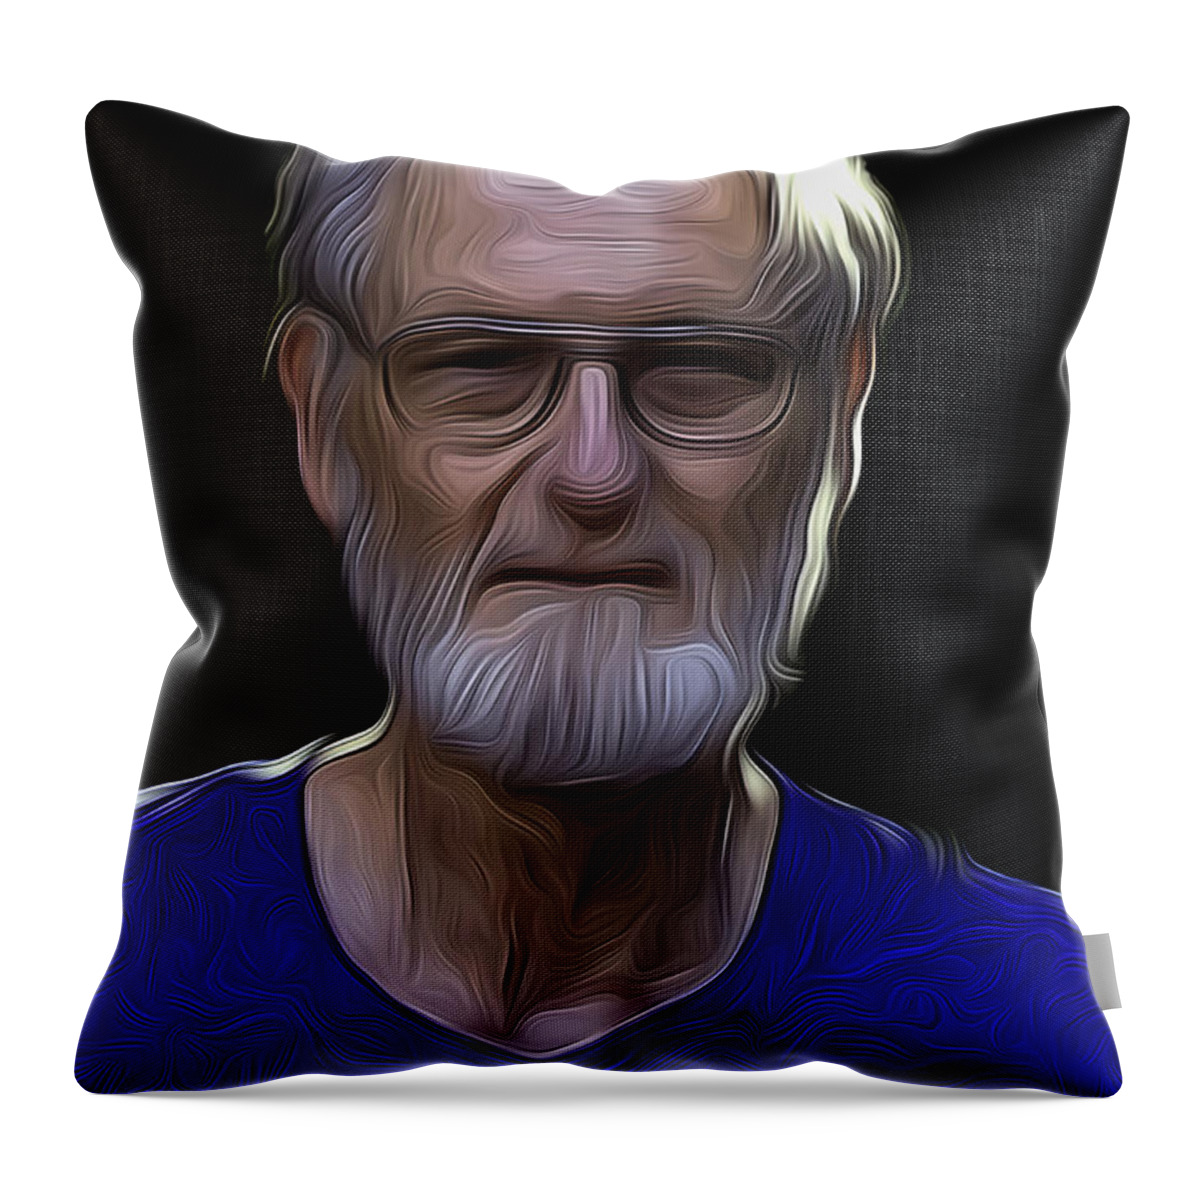 Old Men Throw Pillow featuring the digital art Old Man In Sunlight by Joe Paradis